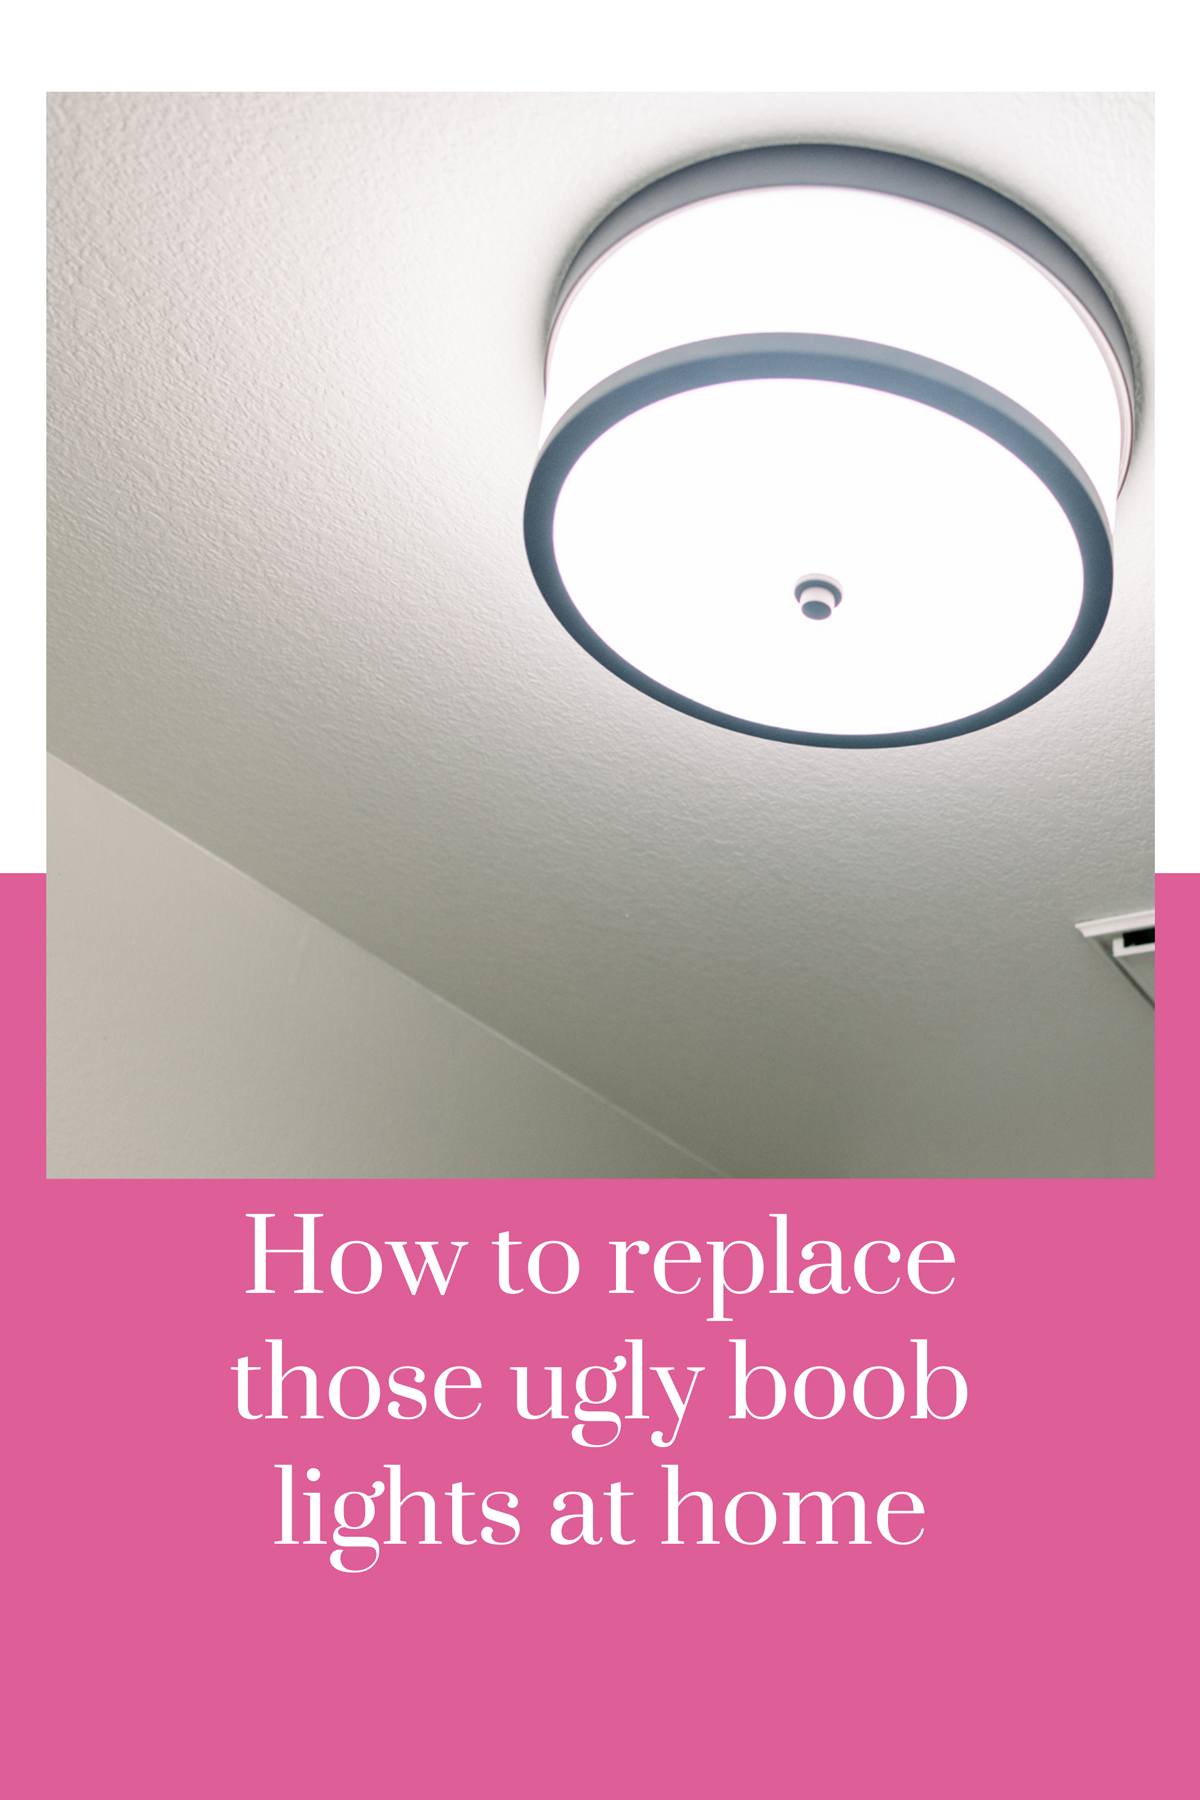 How to replace ugly lights at home